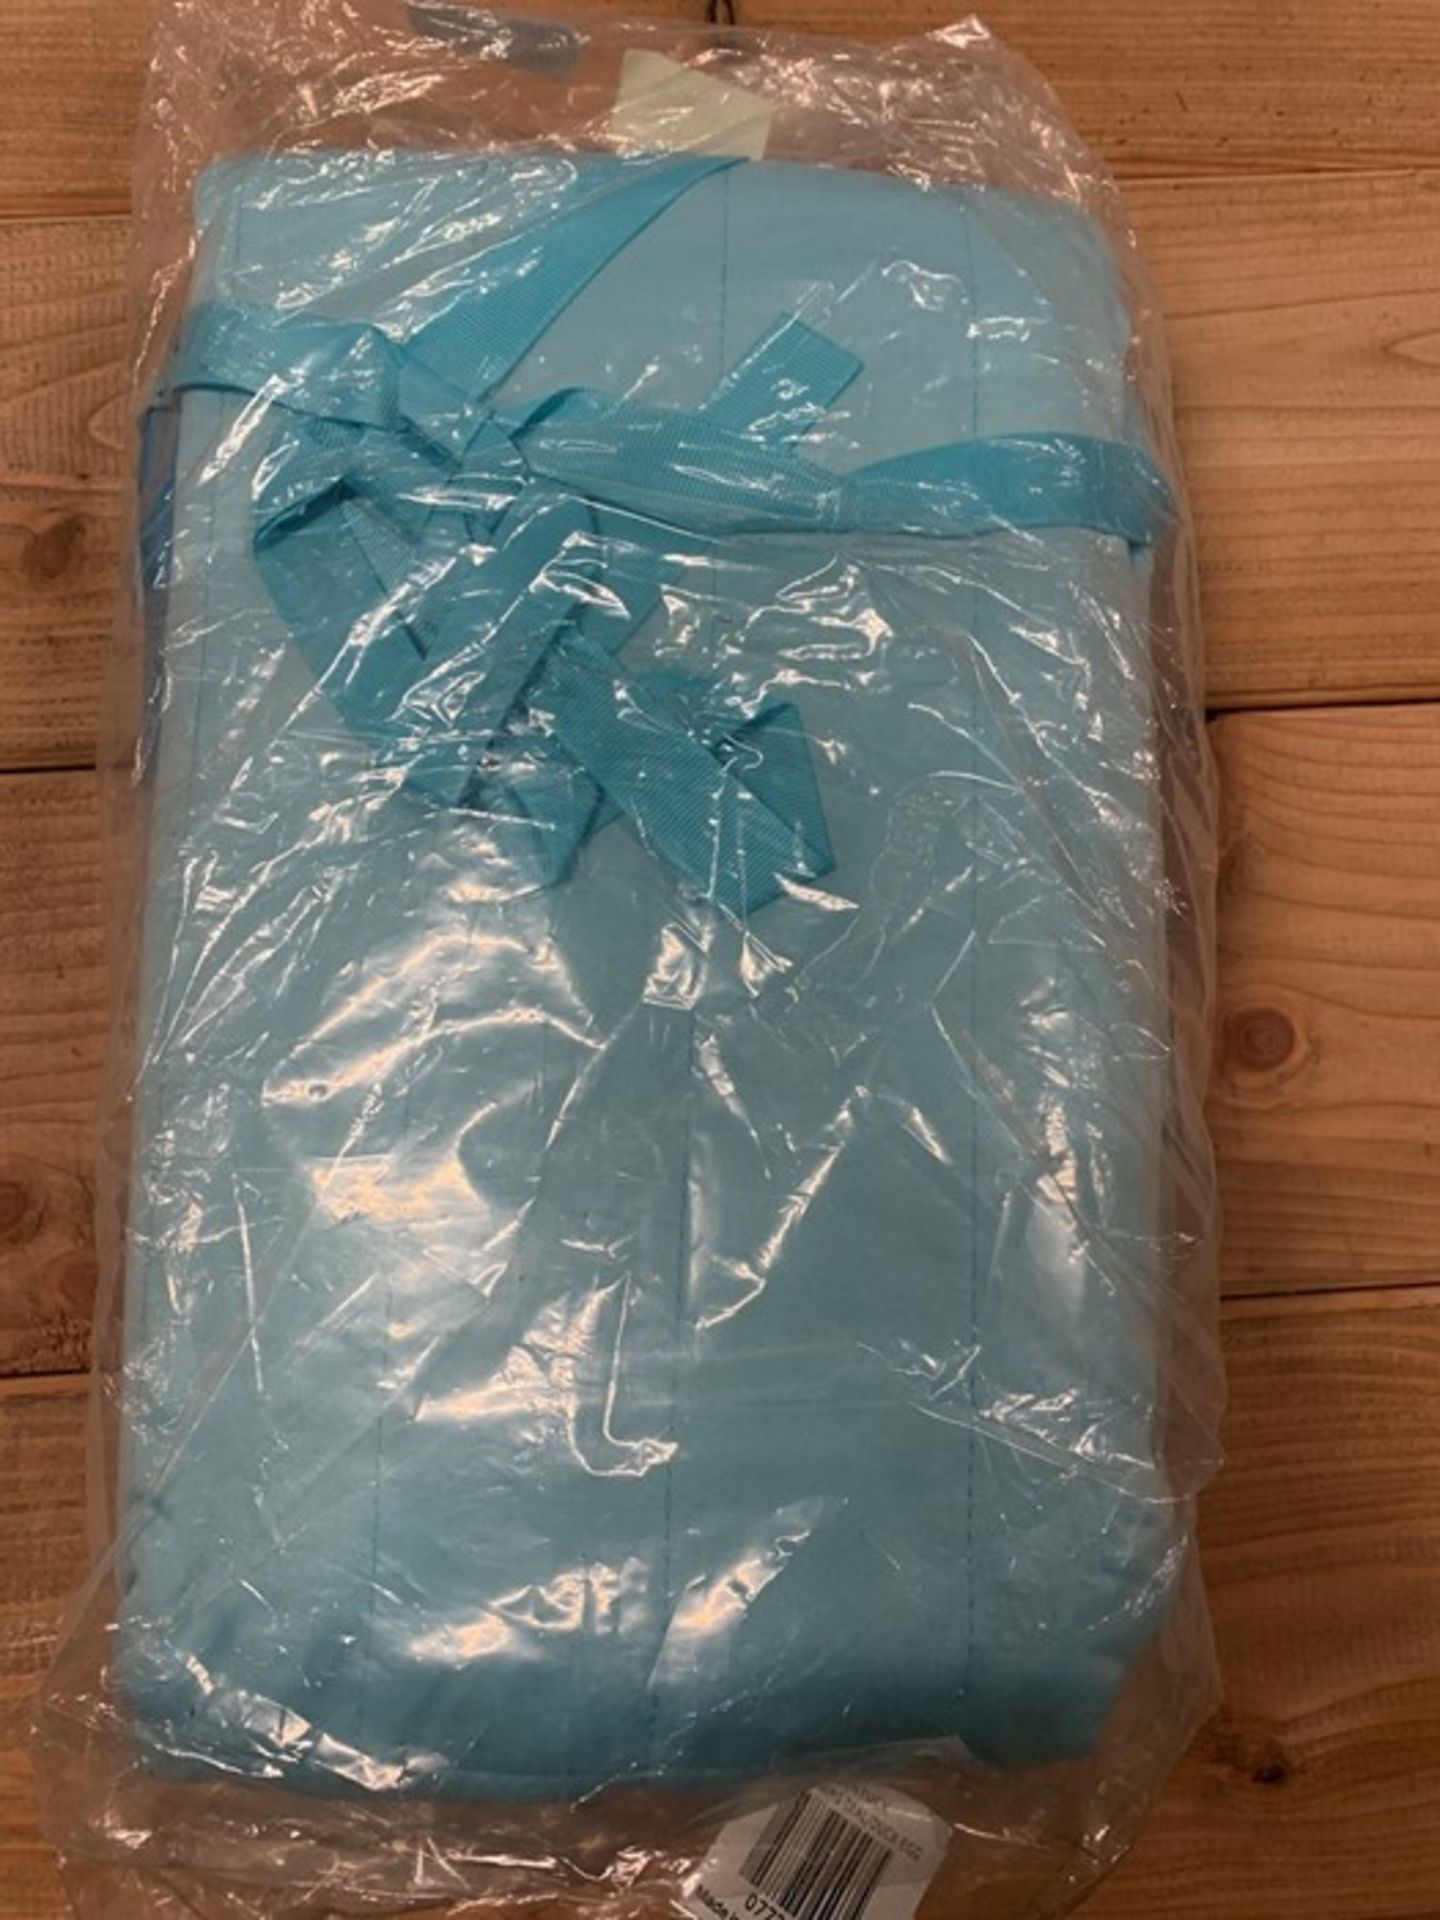 1 BAGGED OXFORD PINTUCK PILLOW SHAMS IN TEAL/DUCK EGG (PUBLIC VIEWING AVAILABLE)